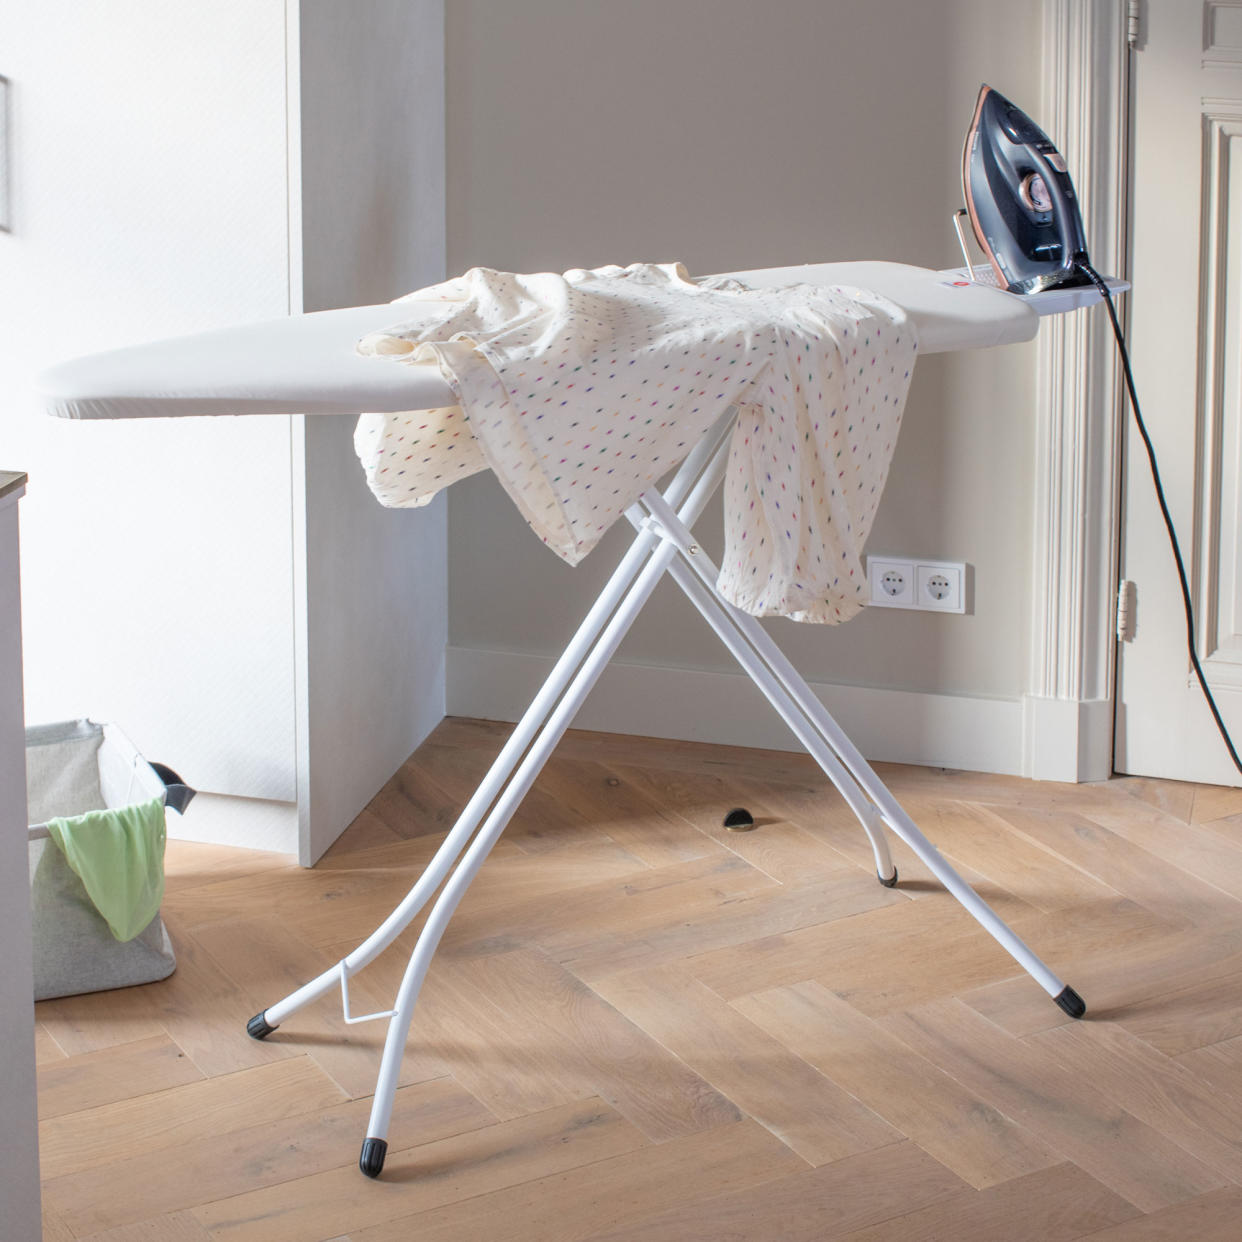  Ironing board with a sheet and iron in a kitchen with herringbone wood floor. 